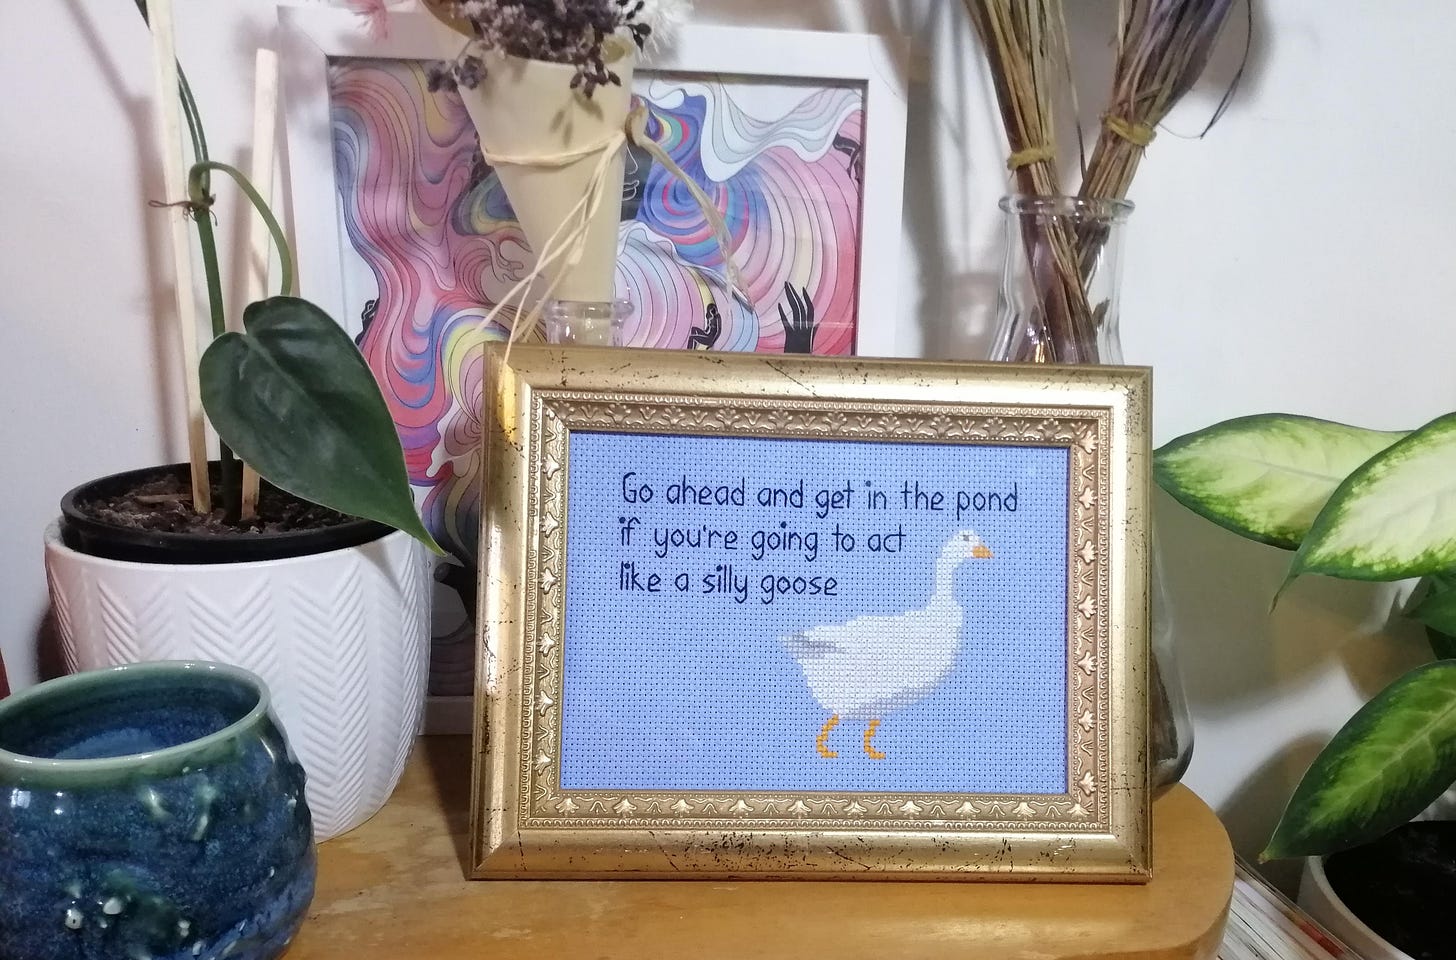 Cross stitch in a gold frame on a shelf with plants and stuff. The stitch is on blue and has a picture of a goose with the text "Go ahead and get in the pond if you're going to act like a silly goose"